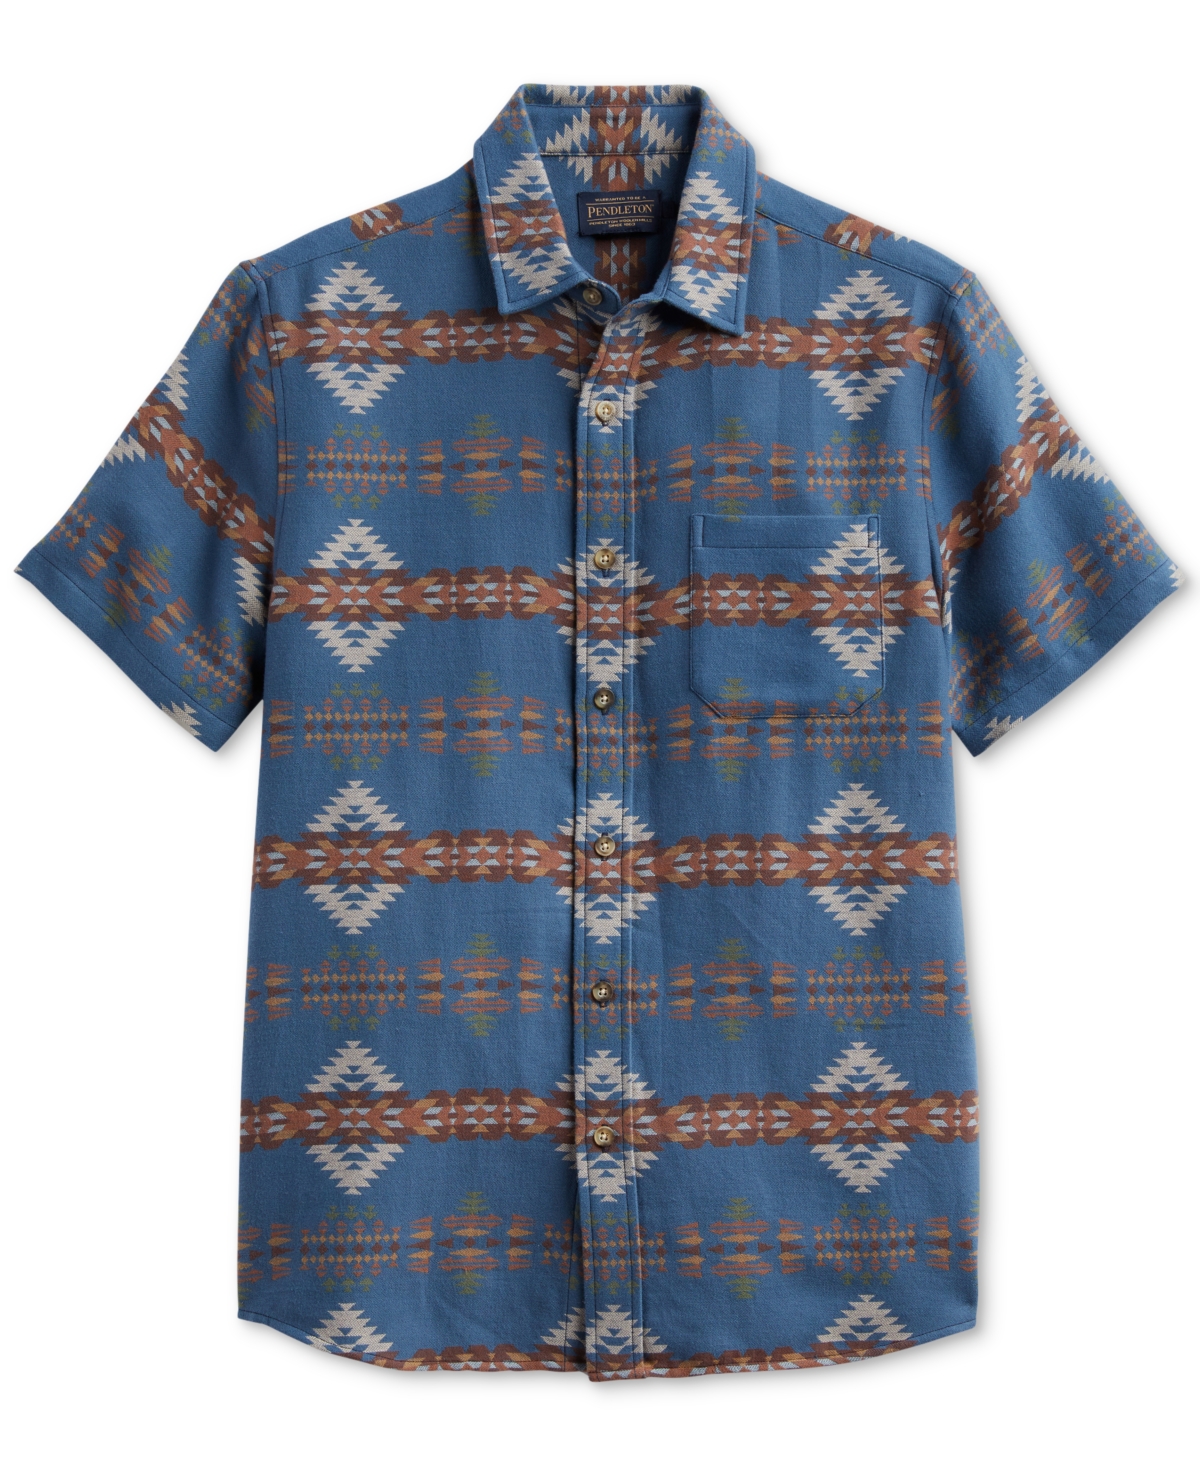 Men's Unbrushed Chamois Printed Short Sleeve Button-Front Shirt - Rancho Arroyo Blue